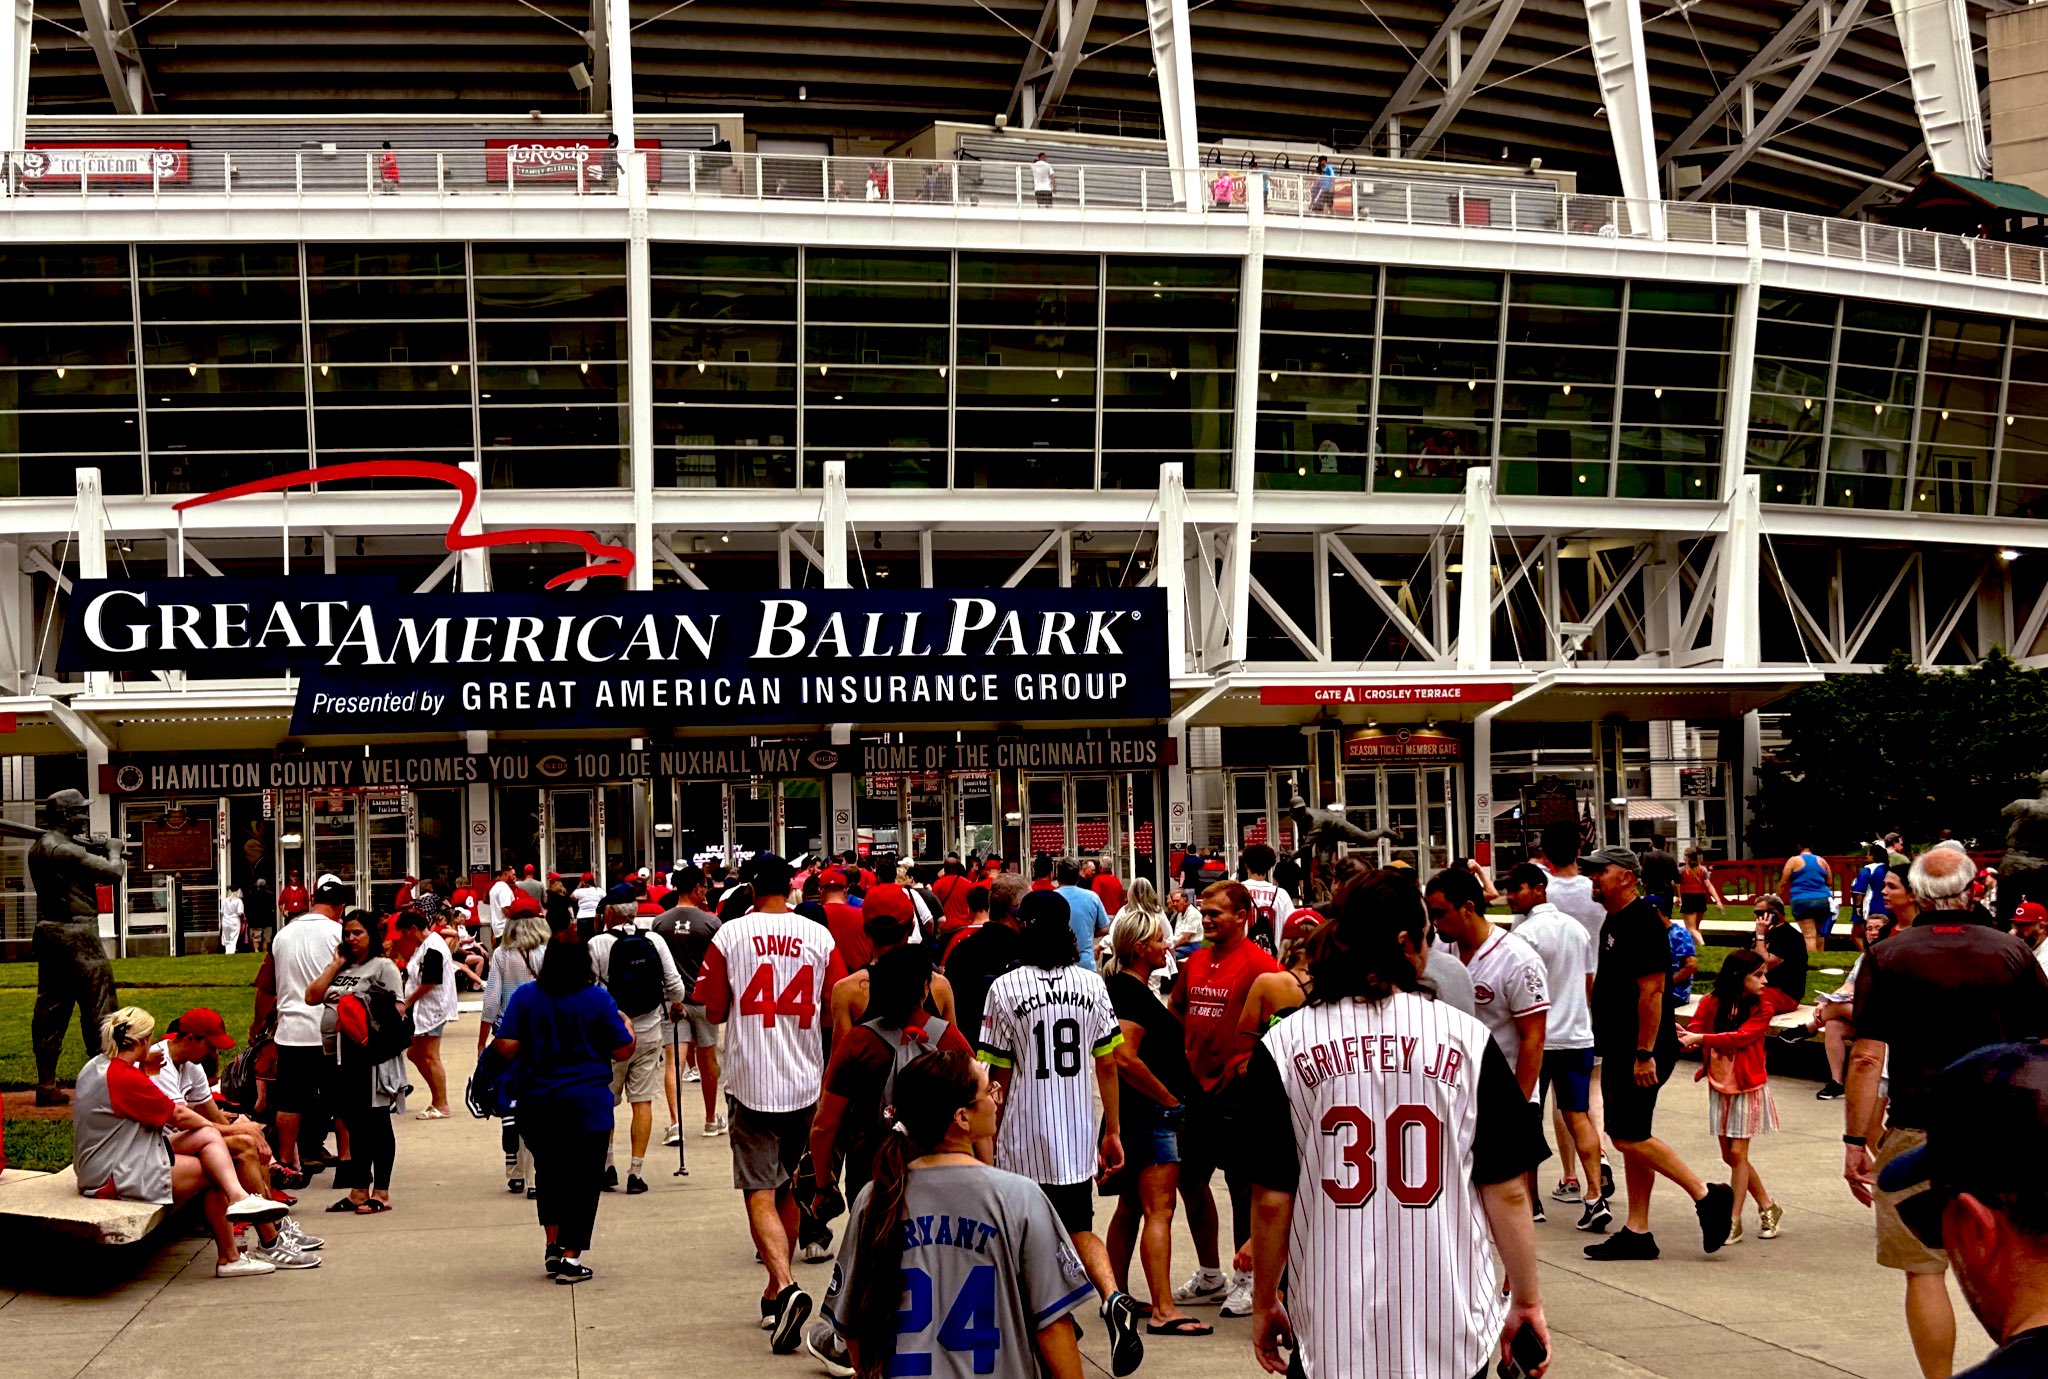 WLWT on X: Lots of fans arriving at Great American Ball Park in